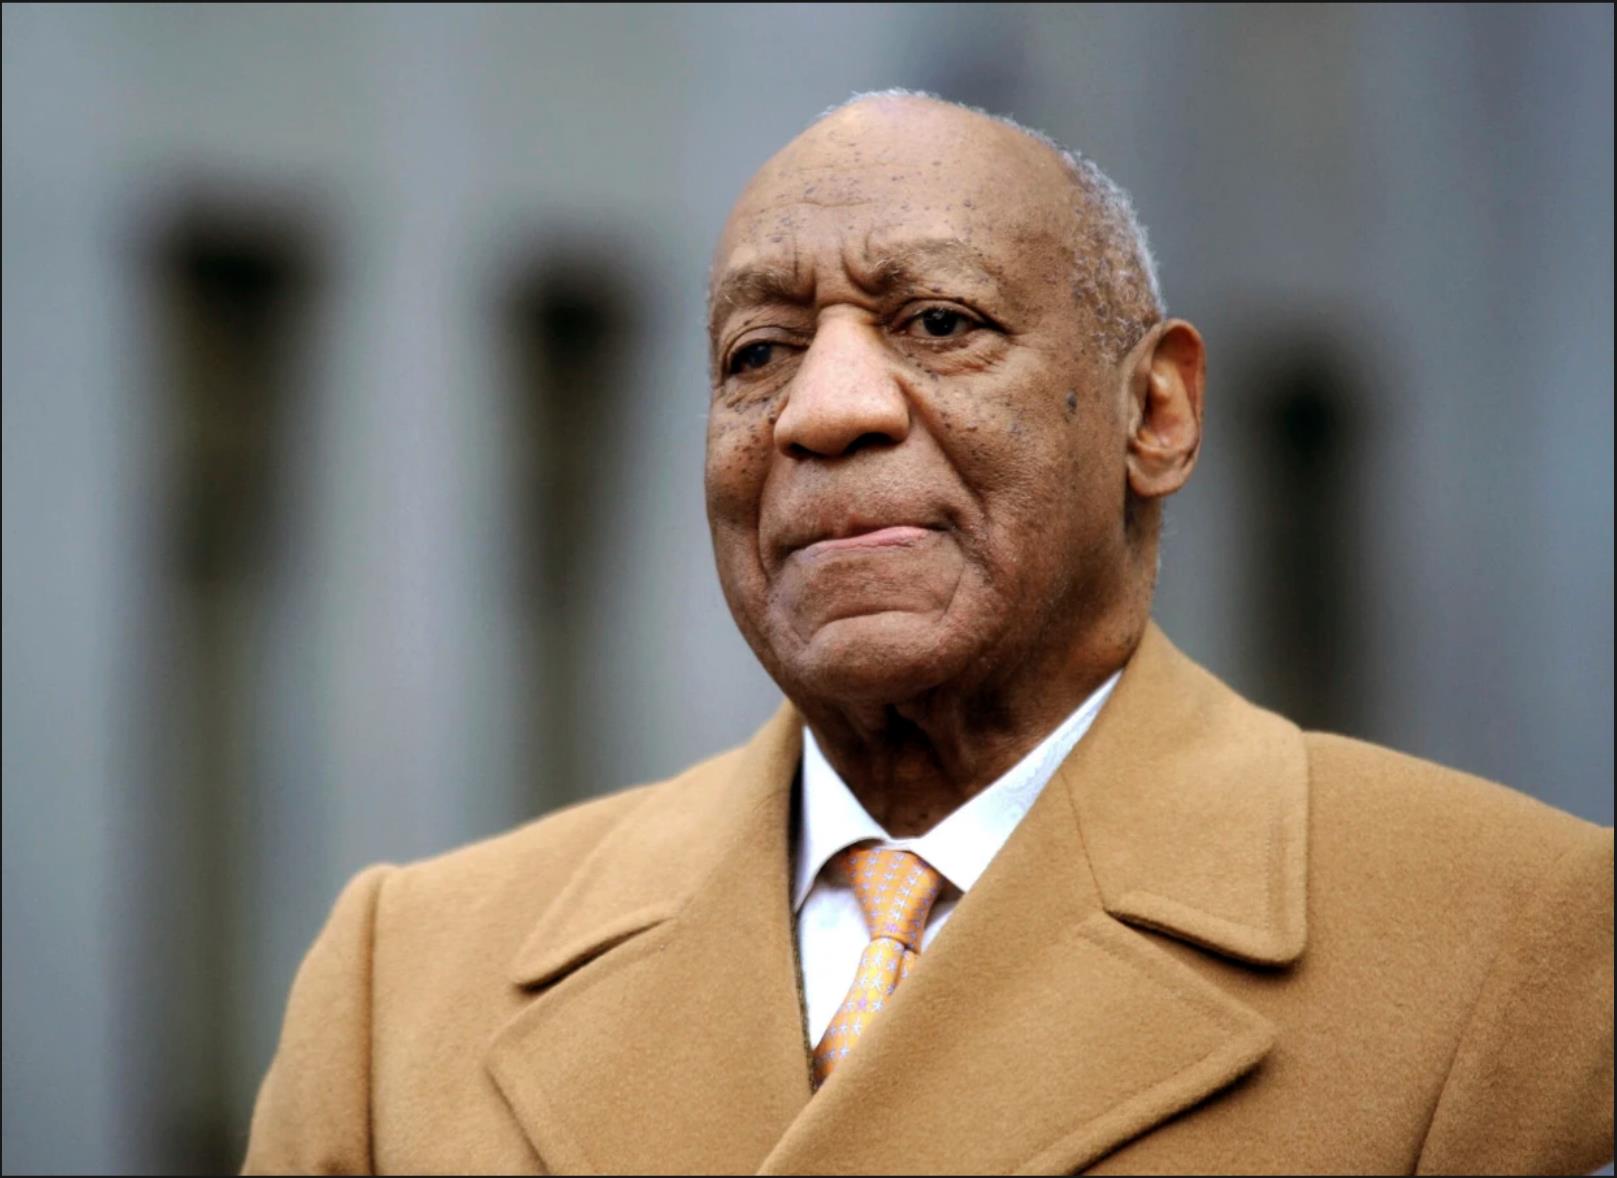 Bill Cosby sued in Nevada by 9 women who accuse him of sexual assault